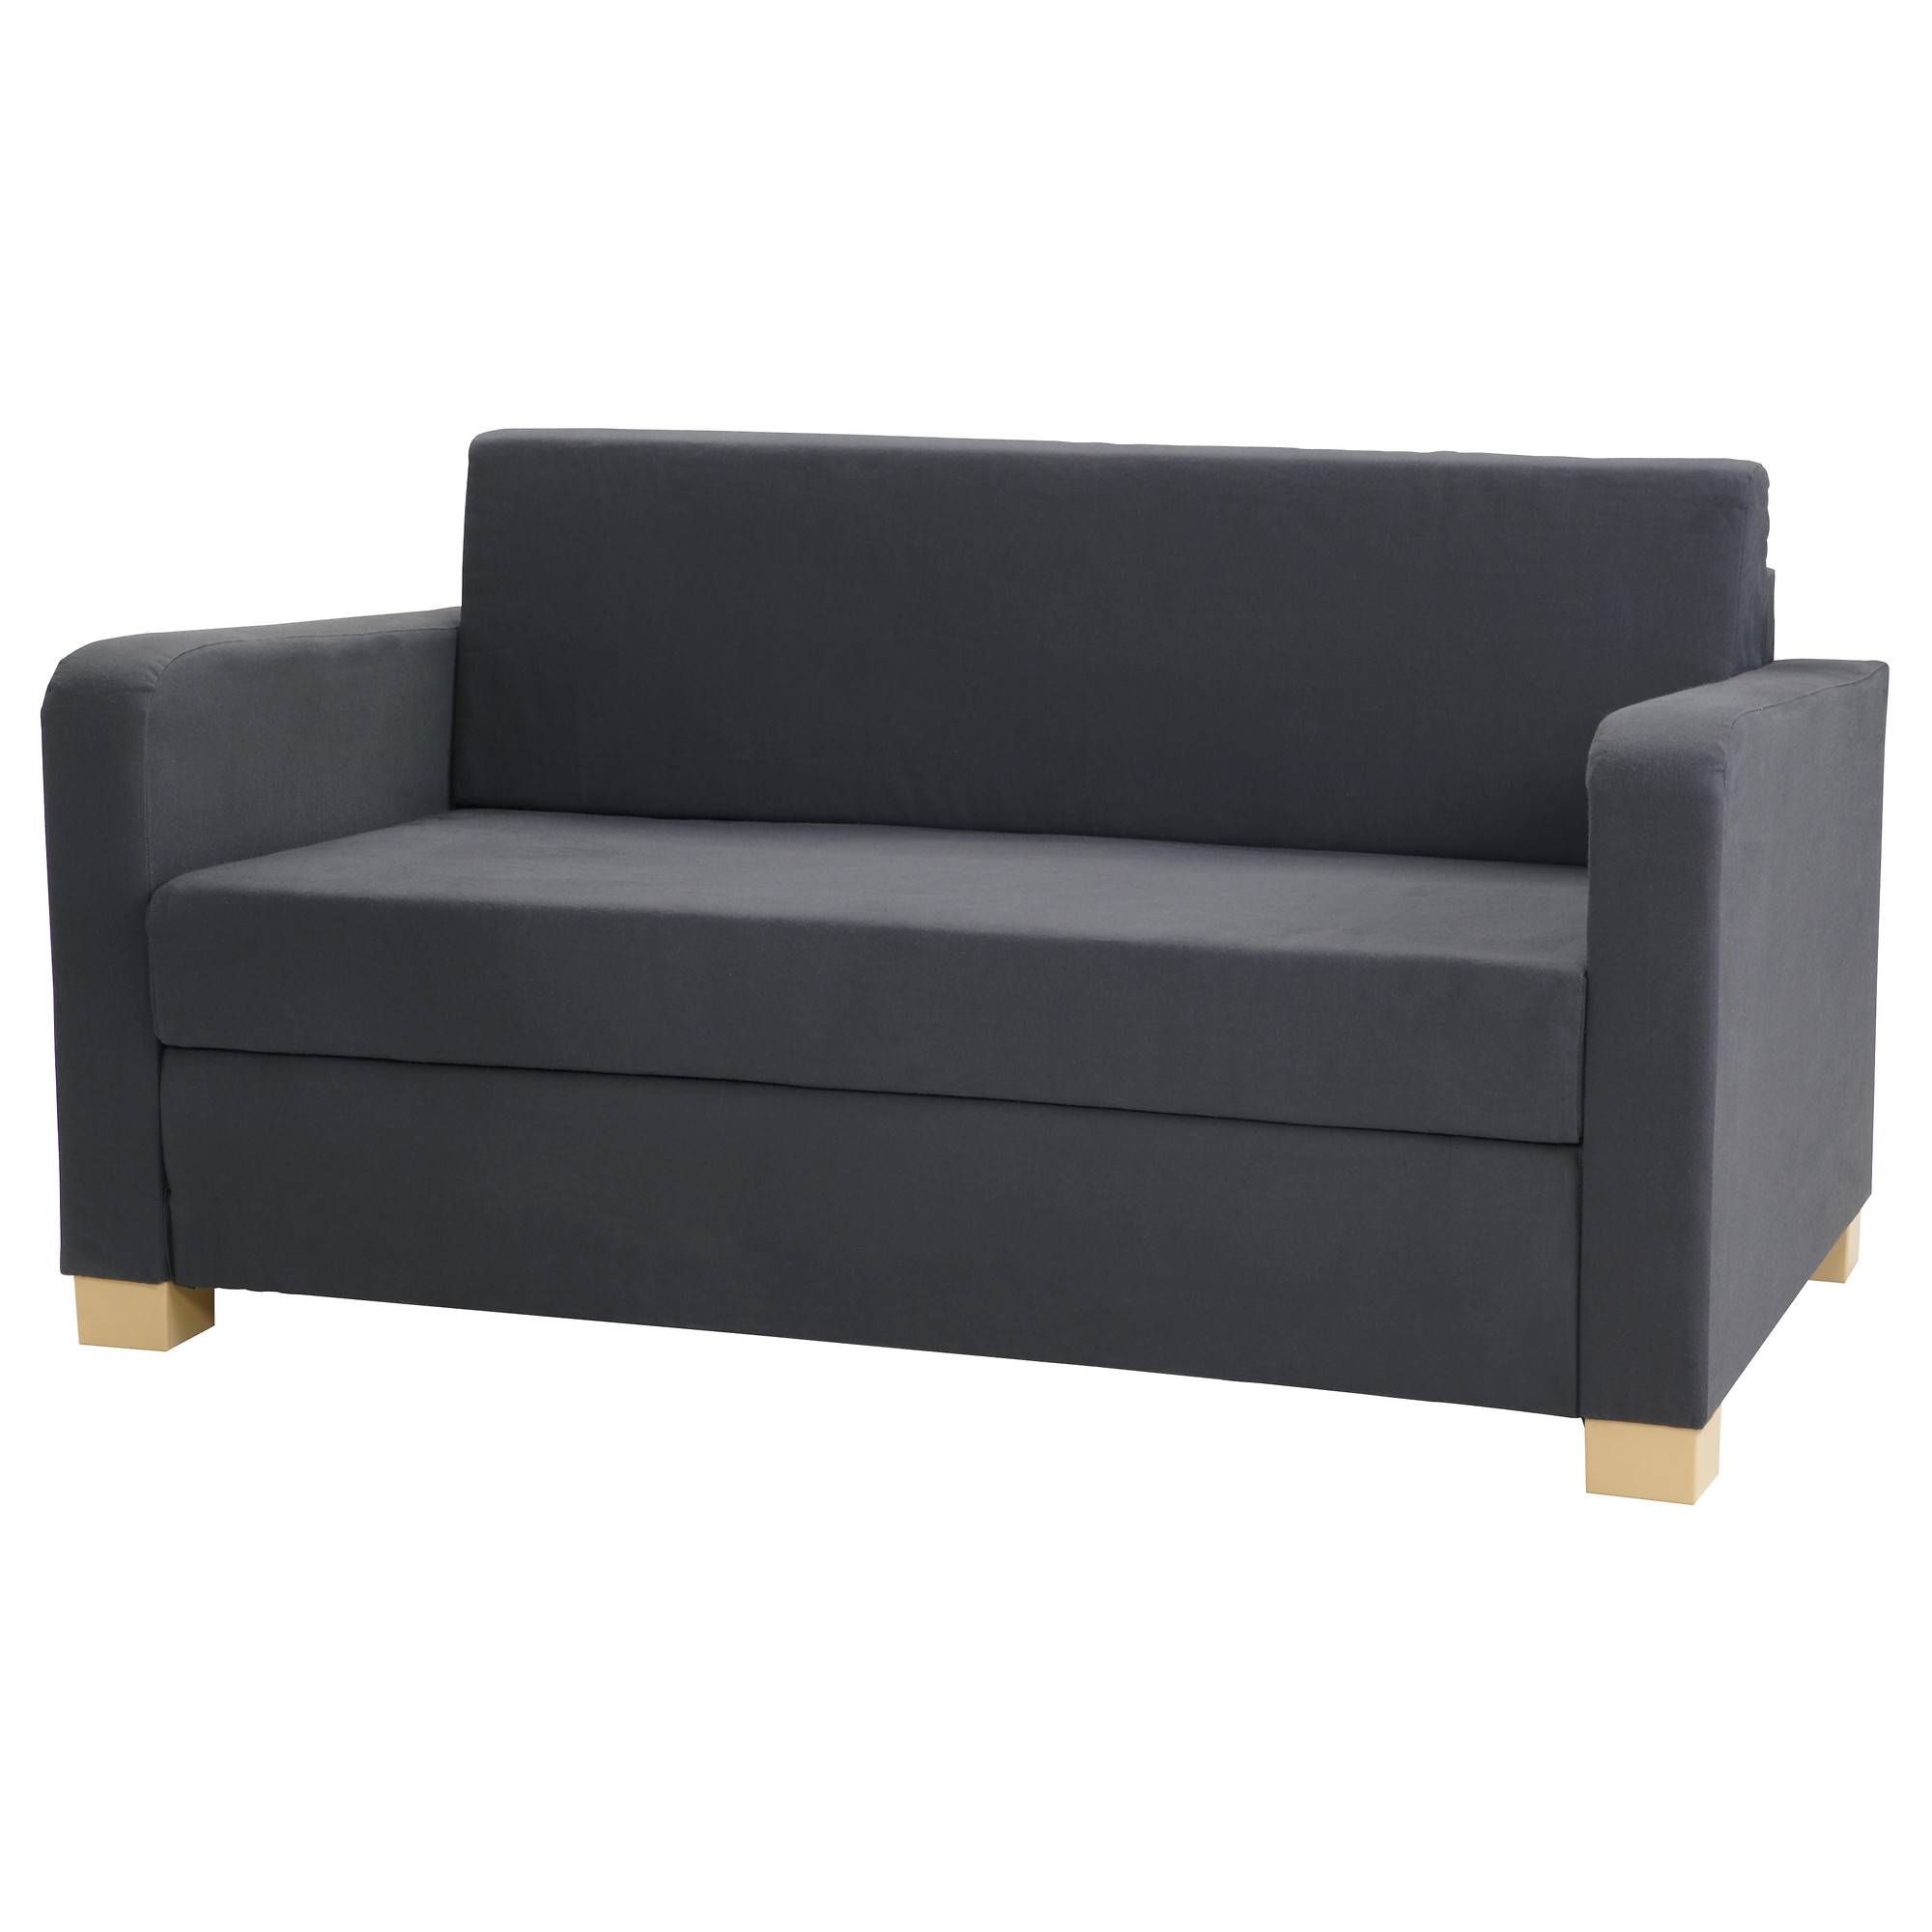 Furniture: Impressive Ikea Sofa Beds For Your Living Room — Mabas4 Throughout L Shaped Sofa Bed (View 28 of 30)